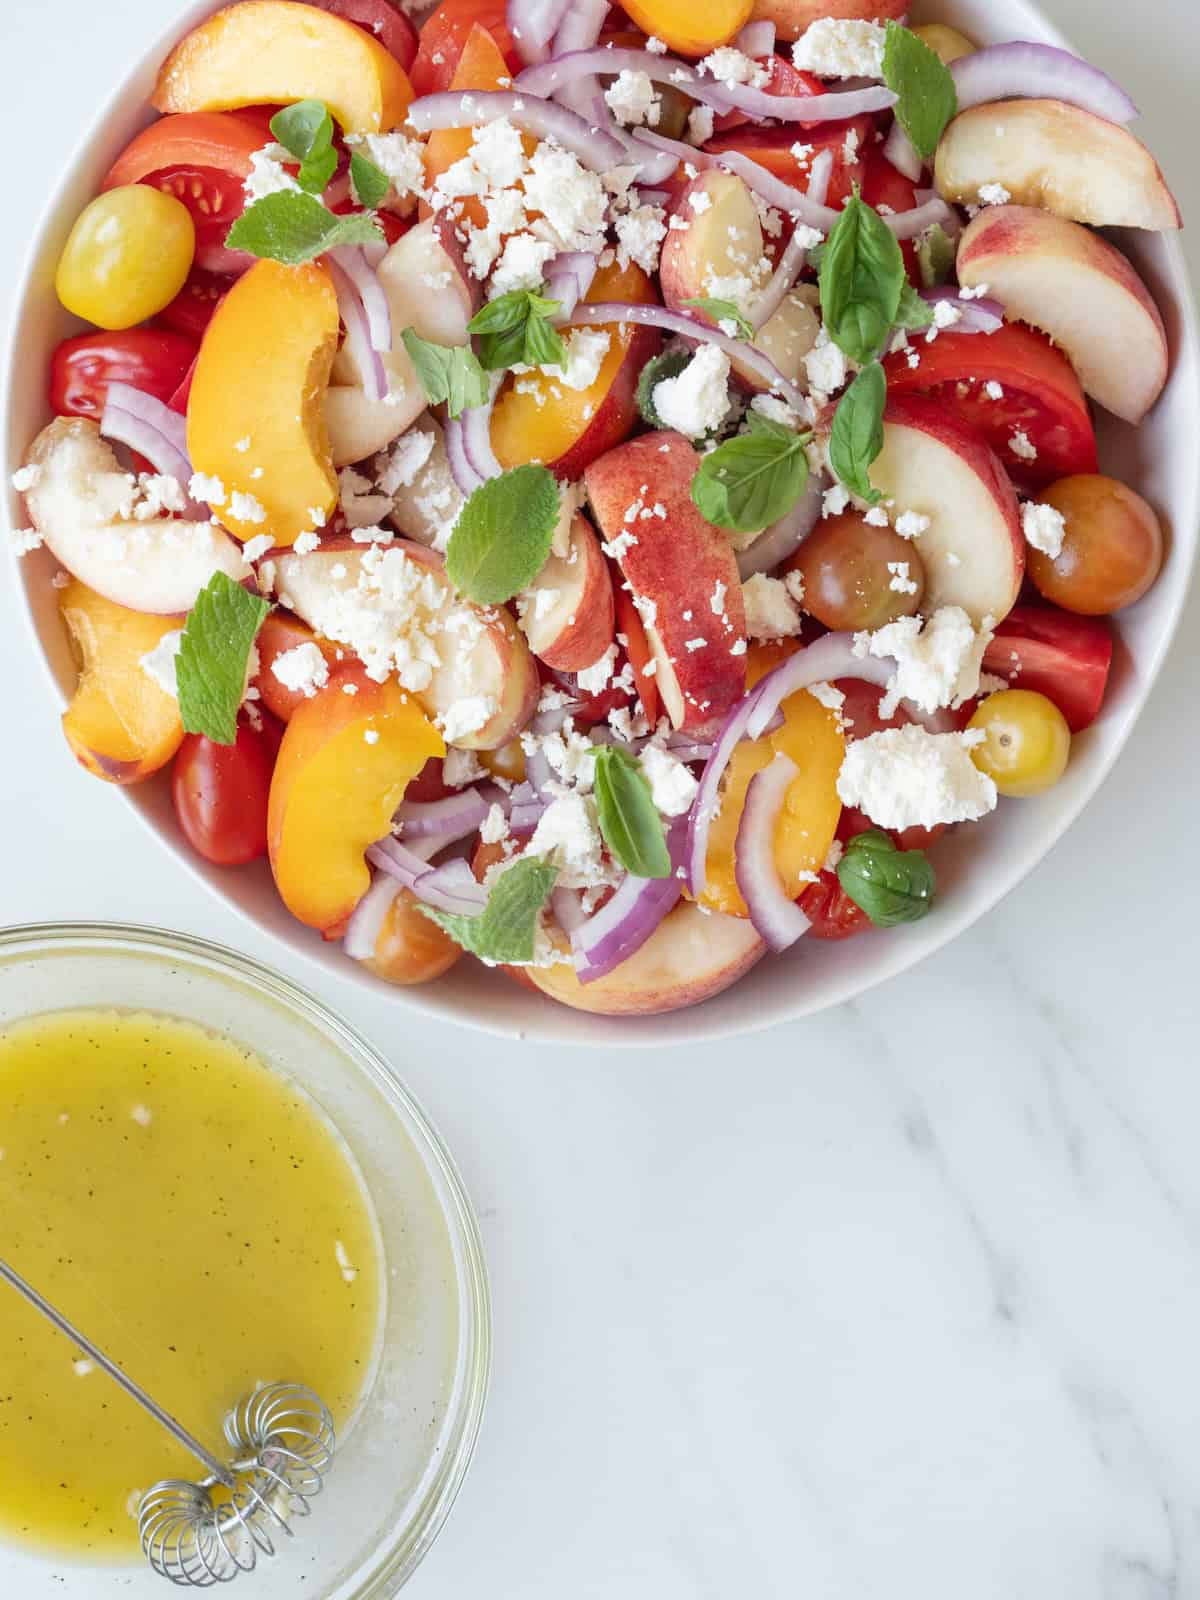 A bowl of stone fruit salad with tomatoes, peaches and nectarines along with a bowl of lemon champagne vinaigrette.